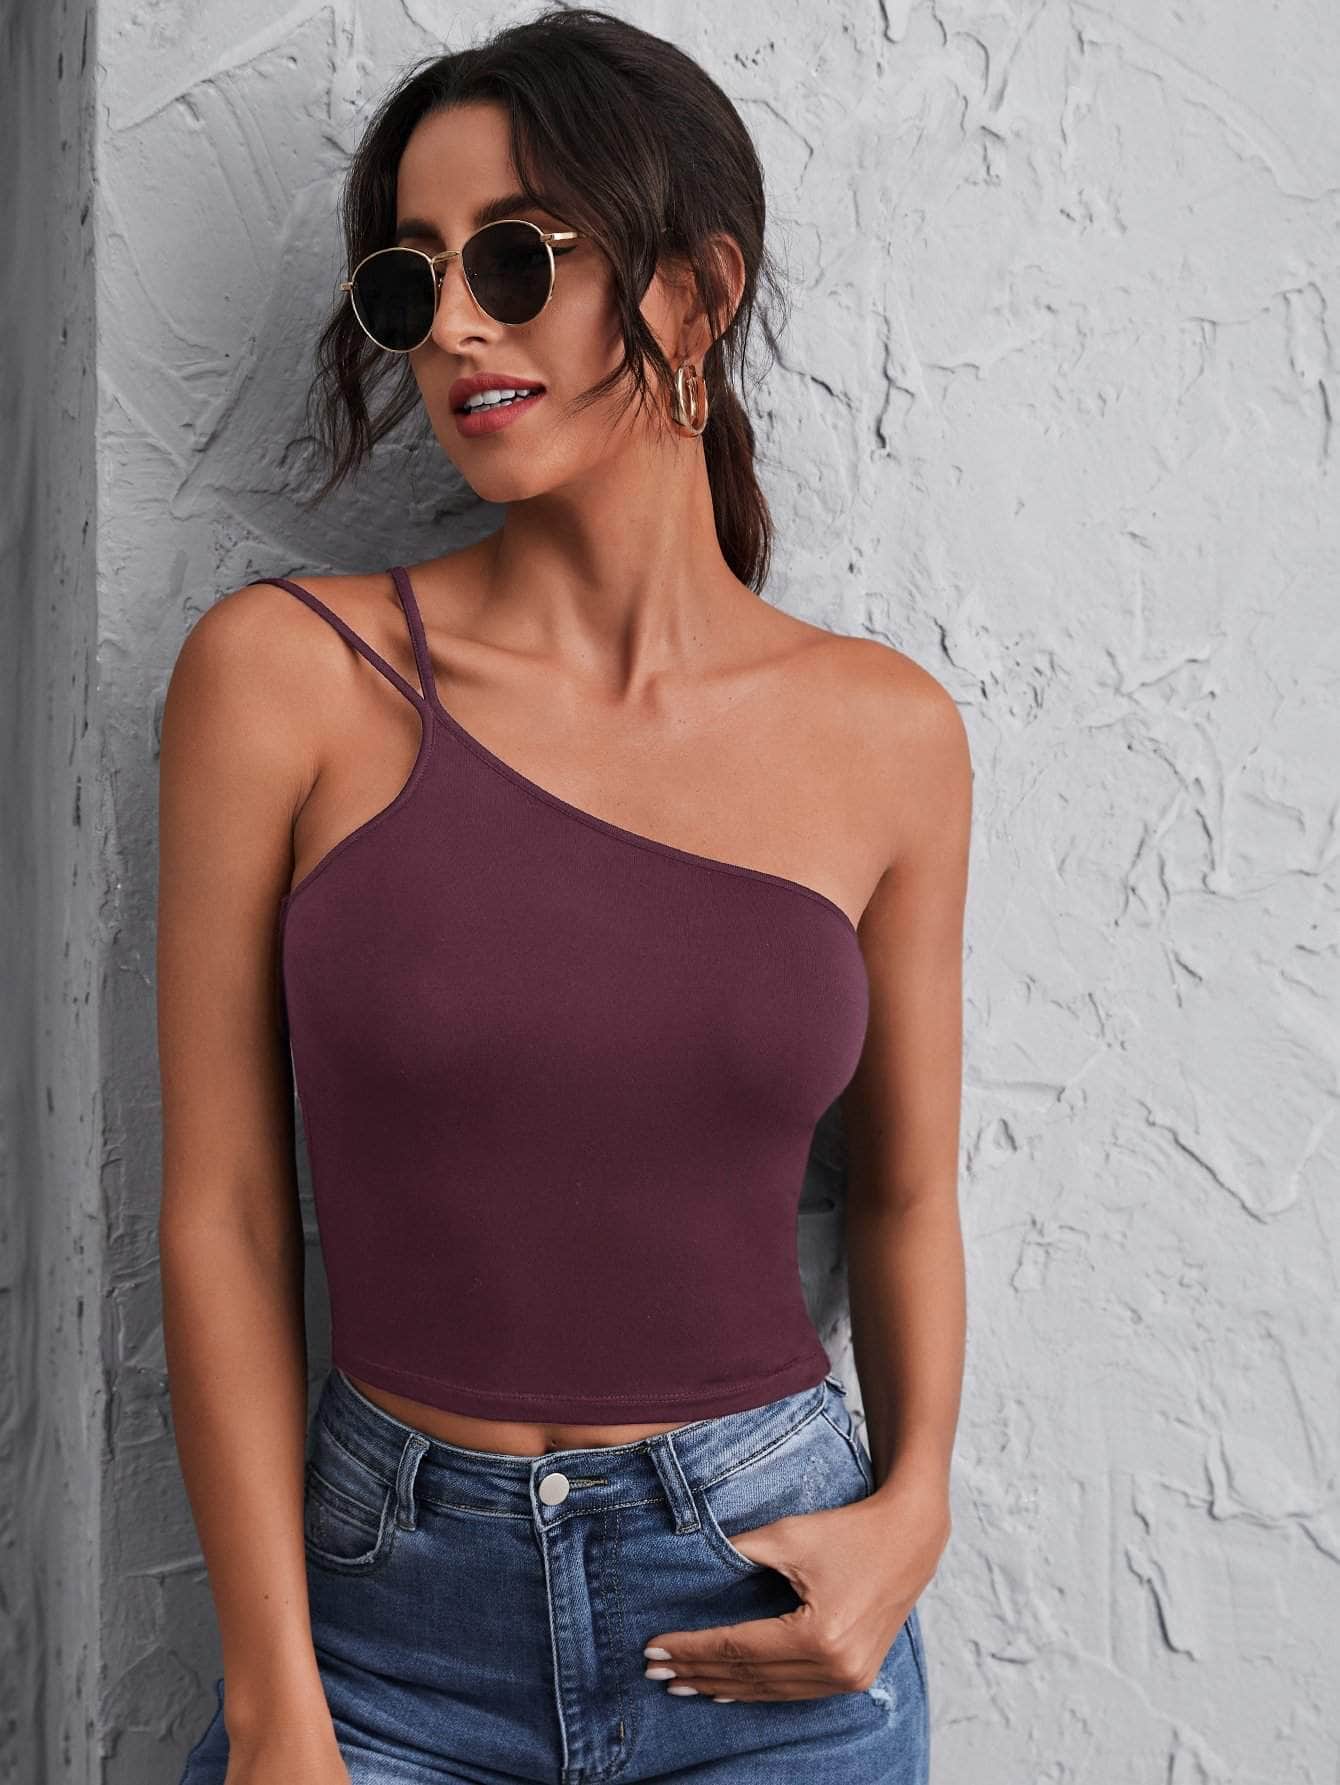 Muybonita.co Topscasualessinmangas3 One Shoulder Double Strap Top